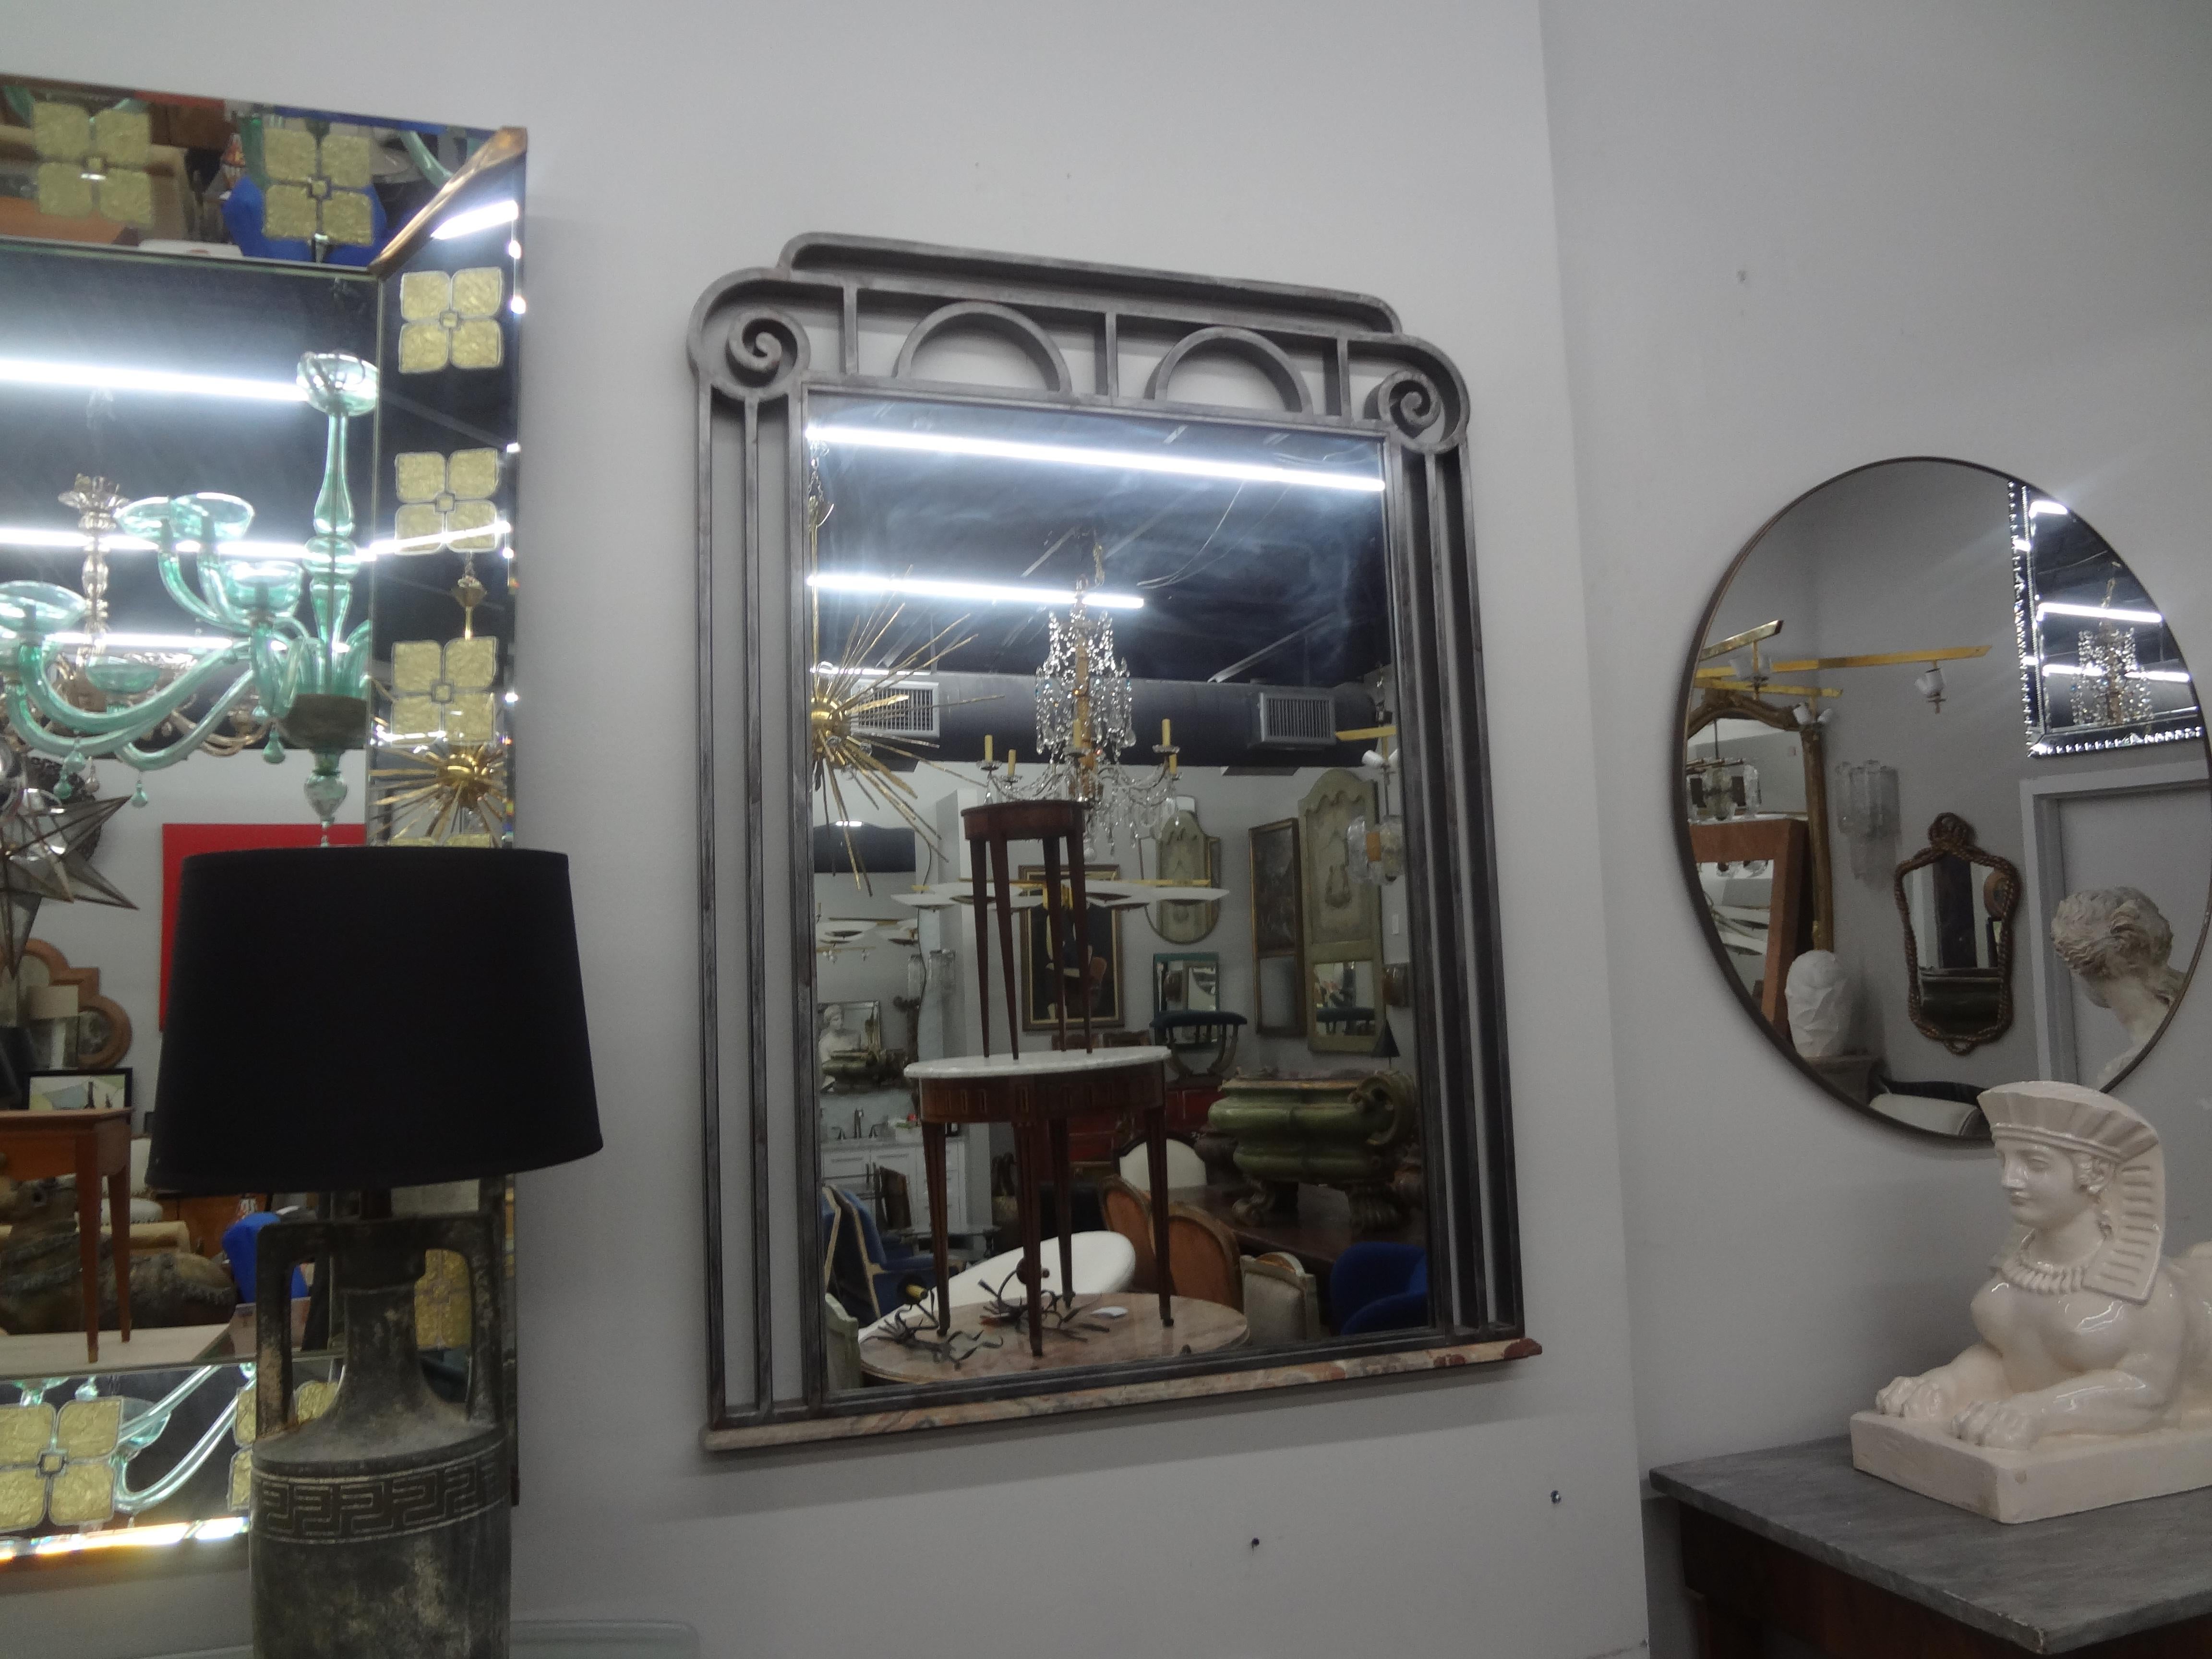 French Art Deco Steel Mirror With Marble Base.
This handsome late Art Deco French steel mirror with a strong geometric design has an unusual marble base and is well made.
Our versatile French mirror would work in a variety of interiors and locations.